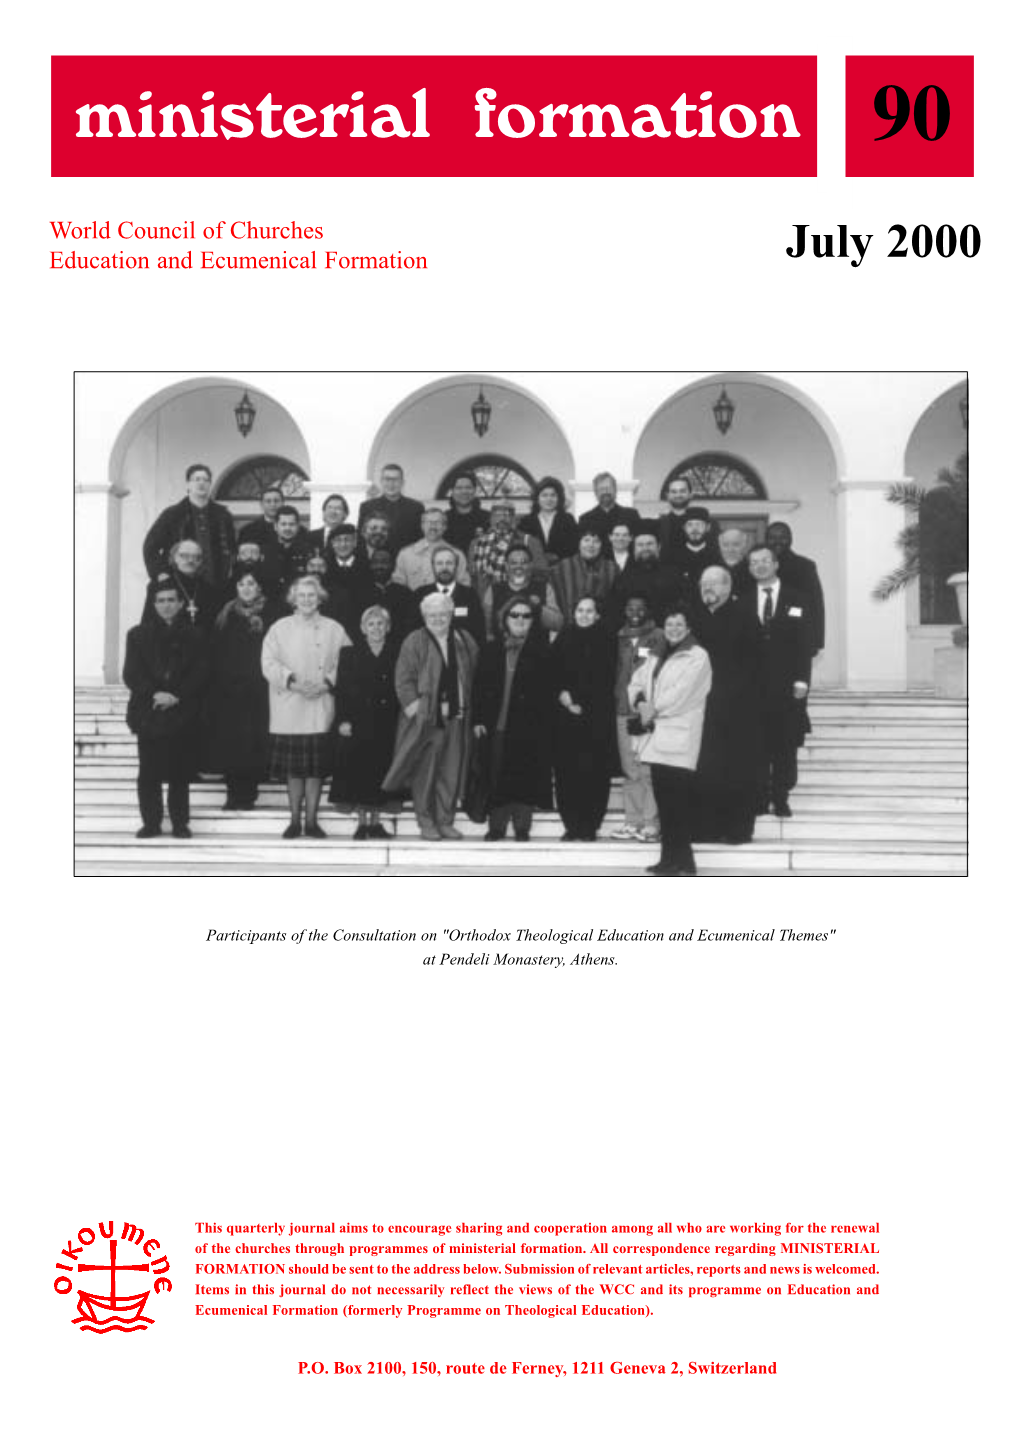 Ministerial Formation, Issue 90, July 2000